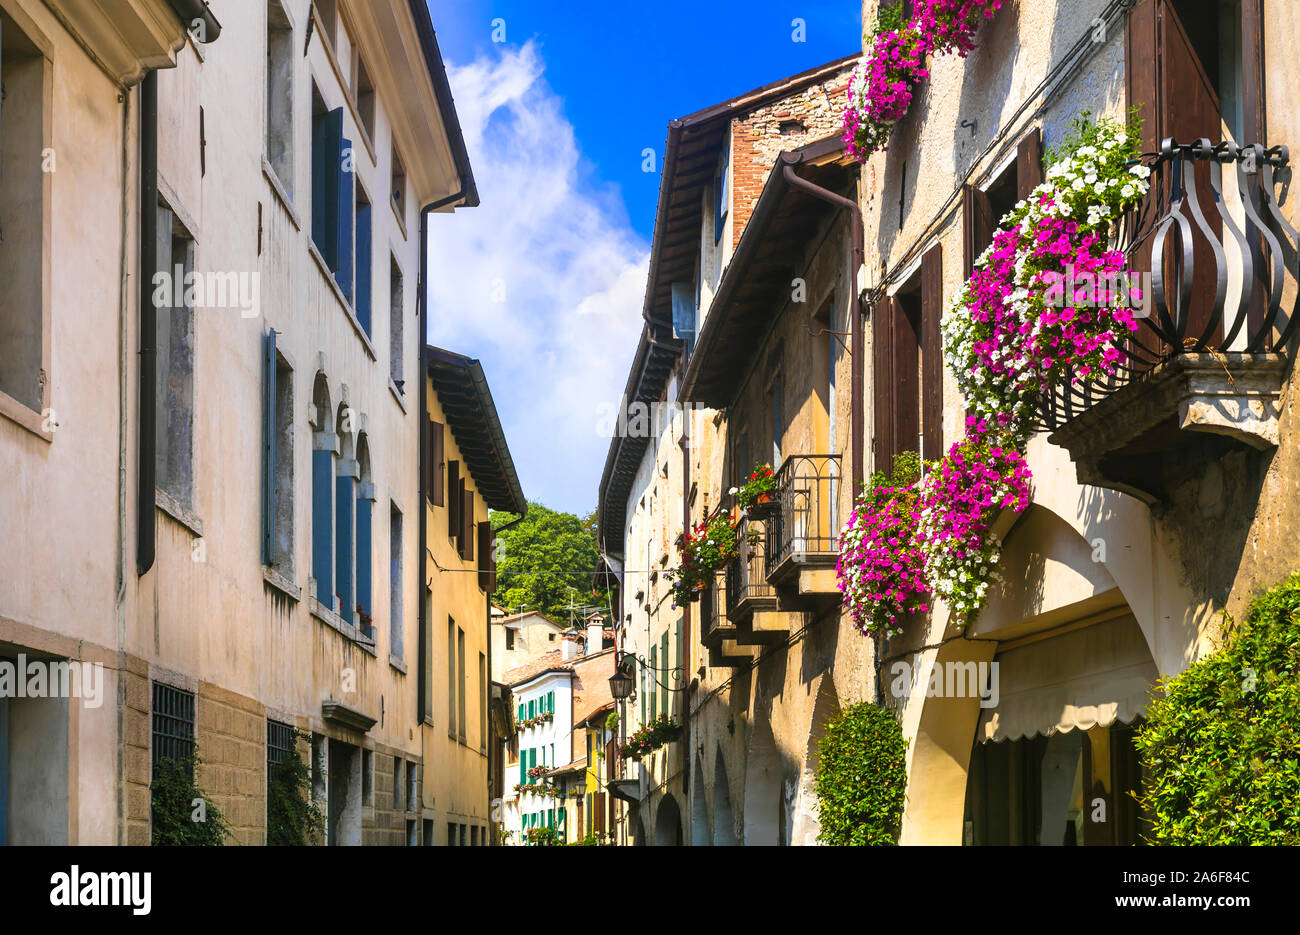 Travel and landmarks of northern Italy - medieval Asolo town in Veneto province Stock Photo